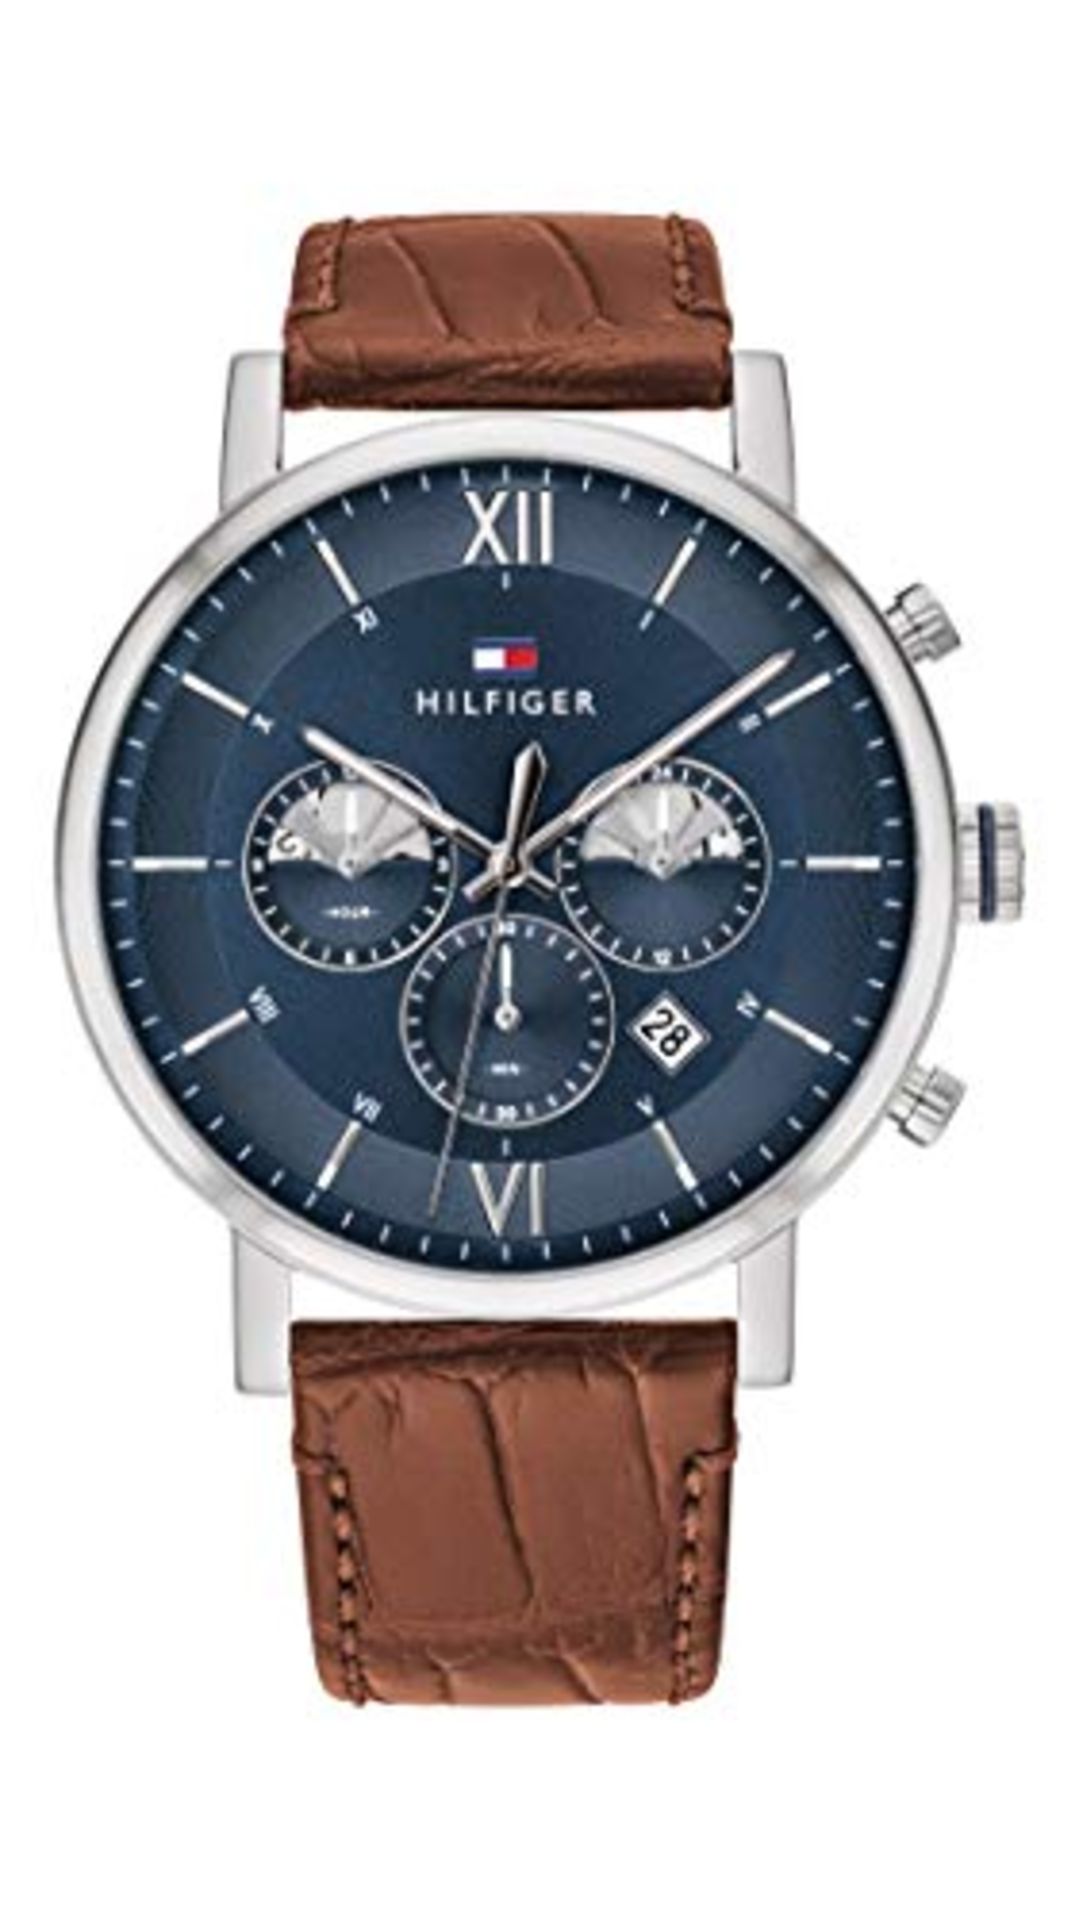 RRP £123.00 Tommy Hilfiger Multi Dial Quartz Watch for Men with Light Brown Leather Strap - 171039 - Image 4 of 6